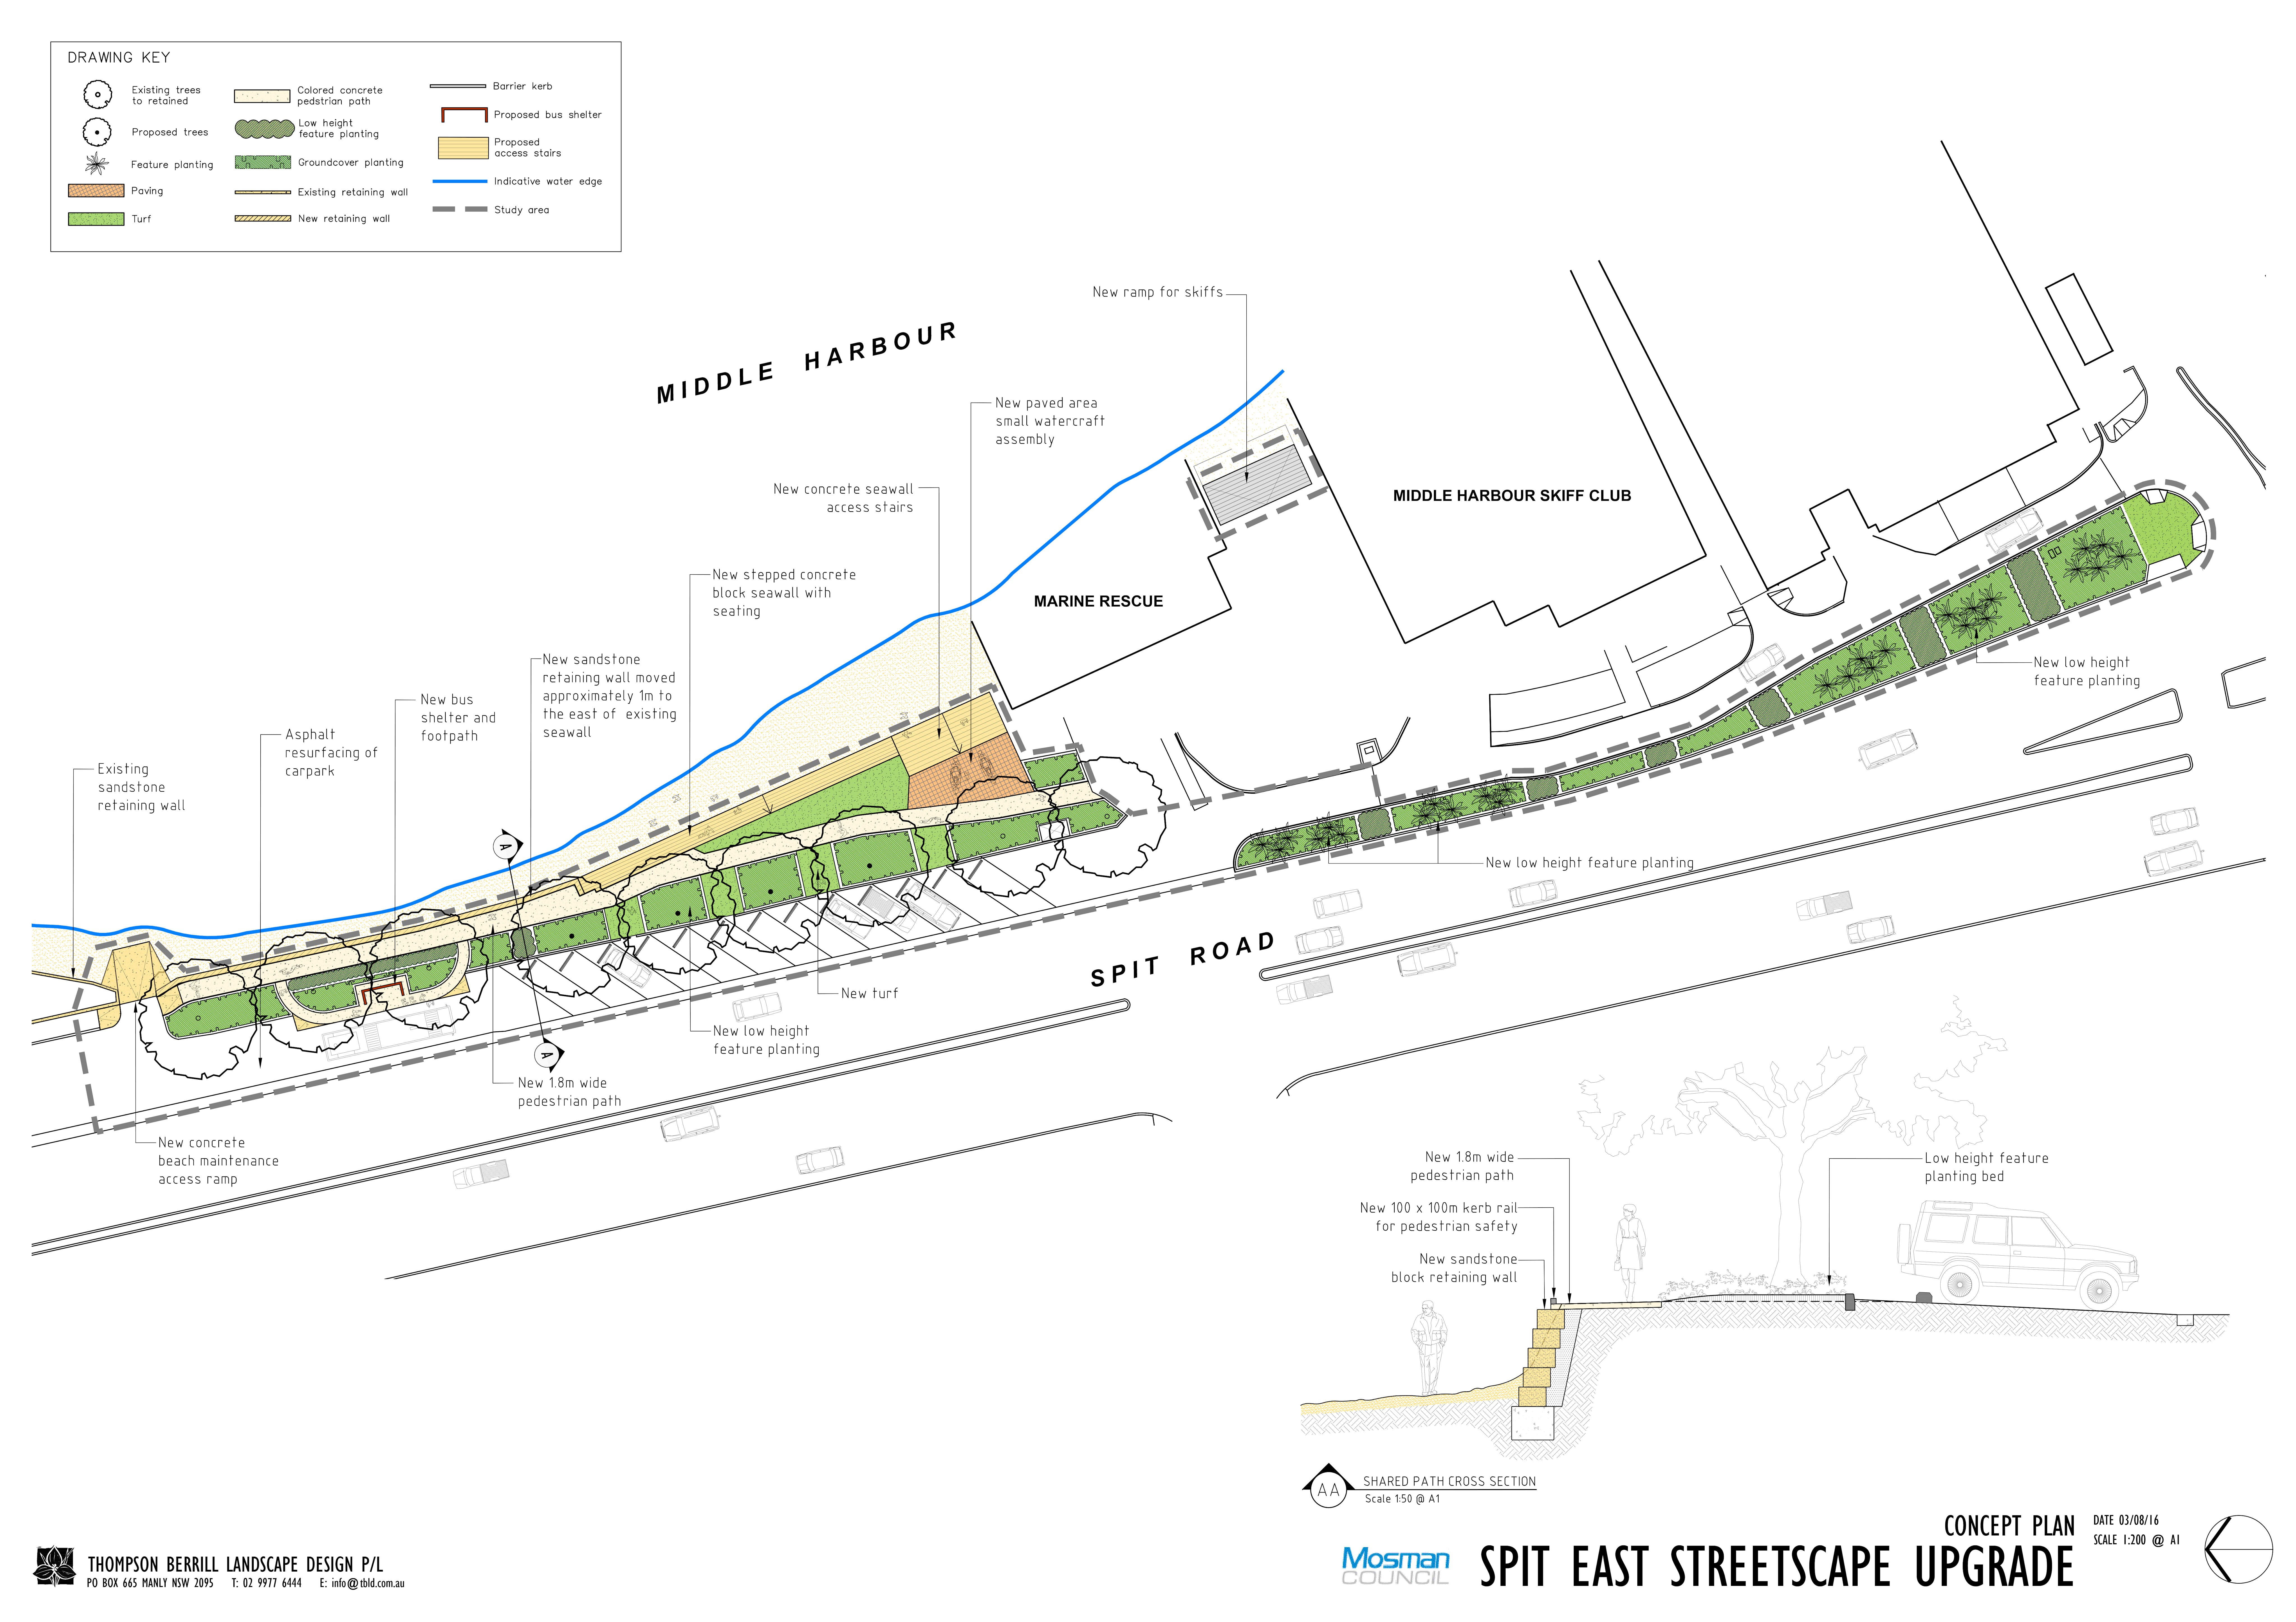 Spit East Streetscape Upgrade Concept